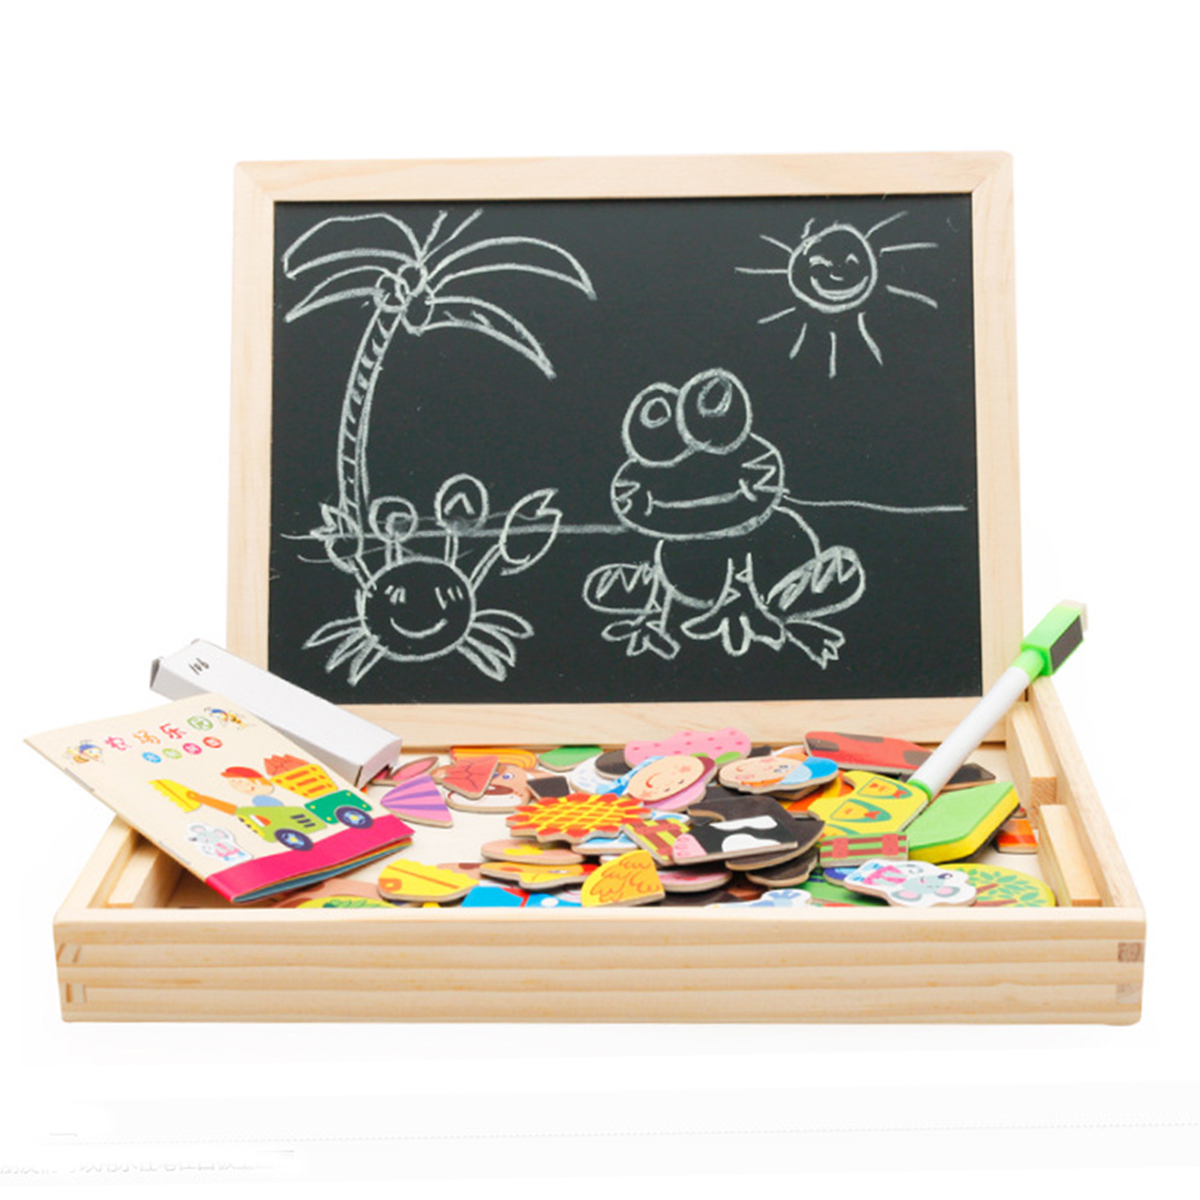 Wooden-DIY-Magnetic-Drawing-Board-Forest-Paradise-Childrens-Early-Educational-Learning-Toys-1676971-5